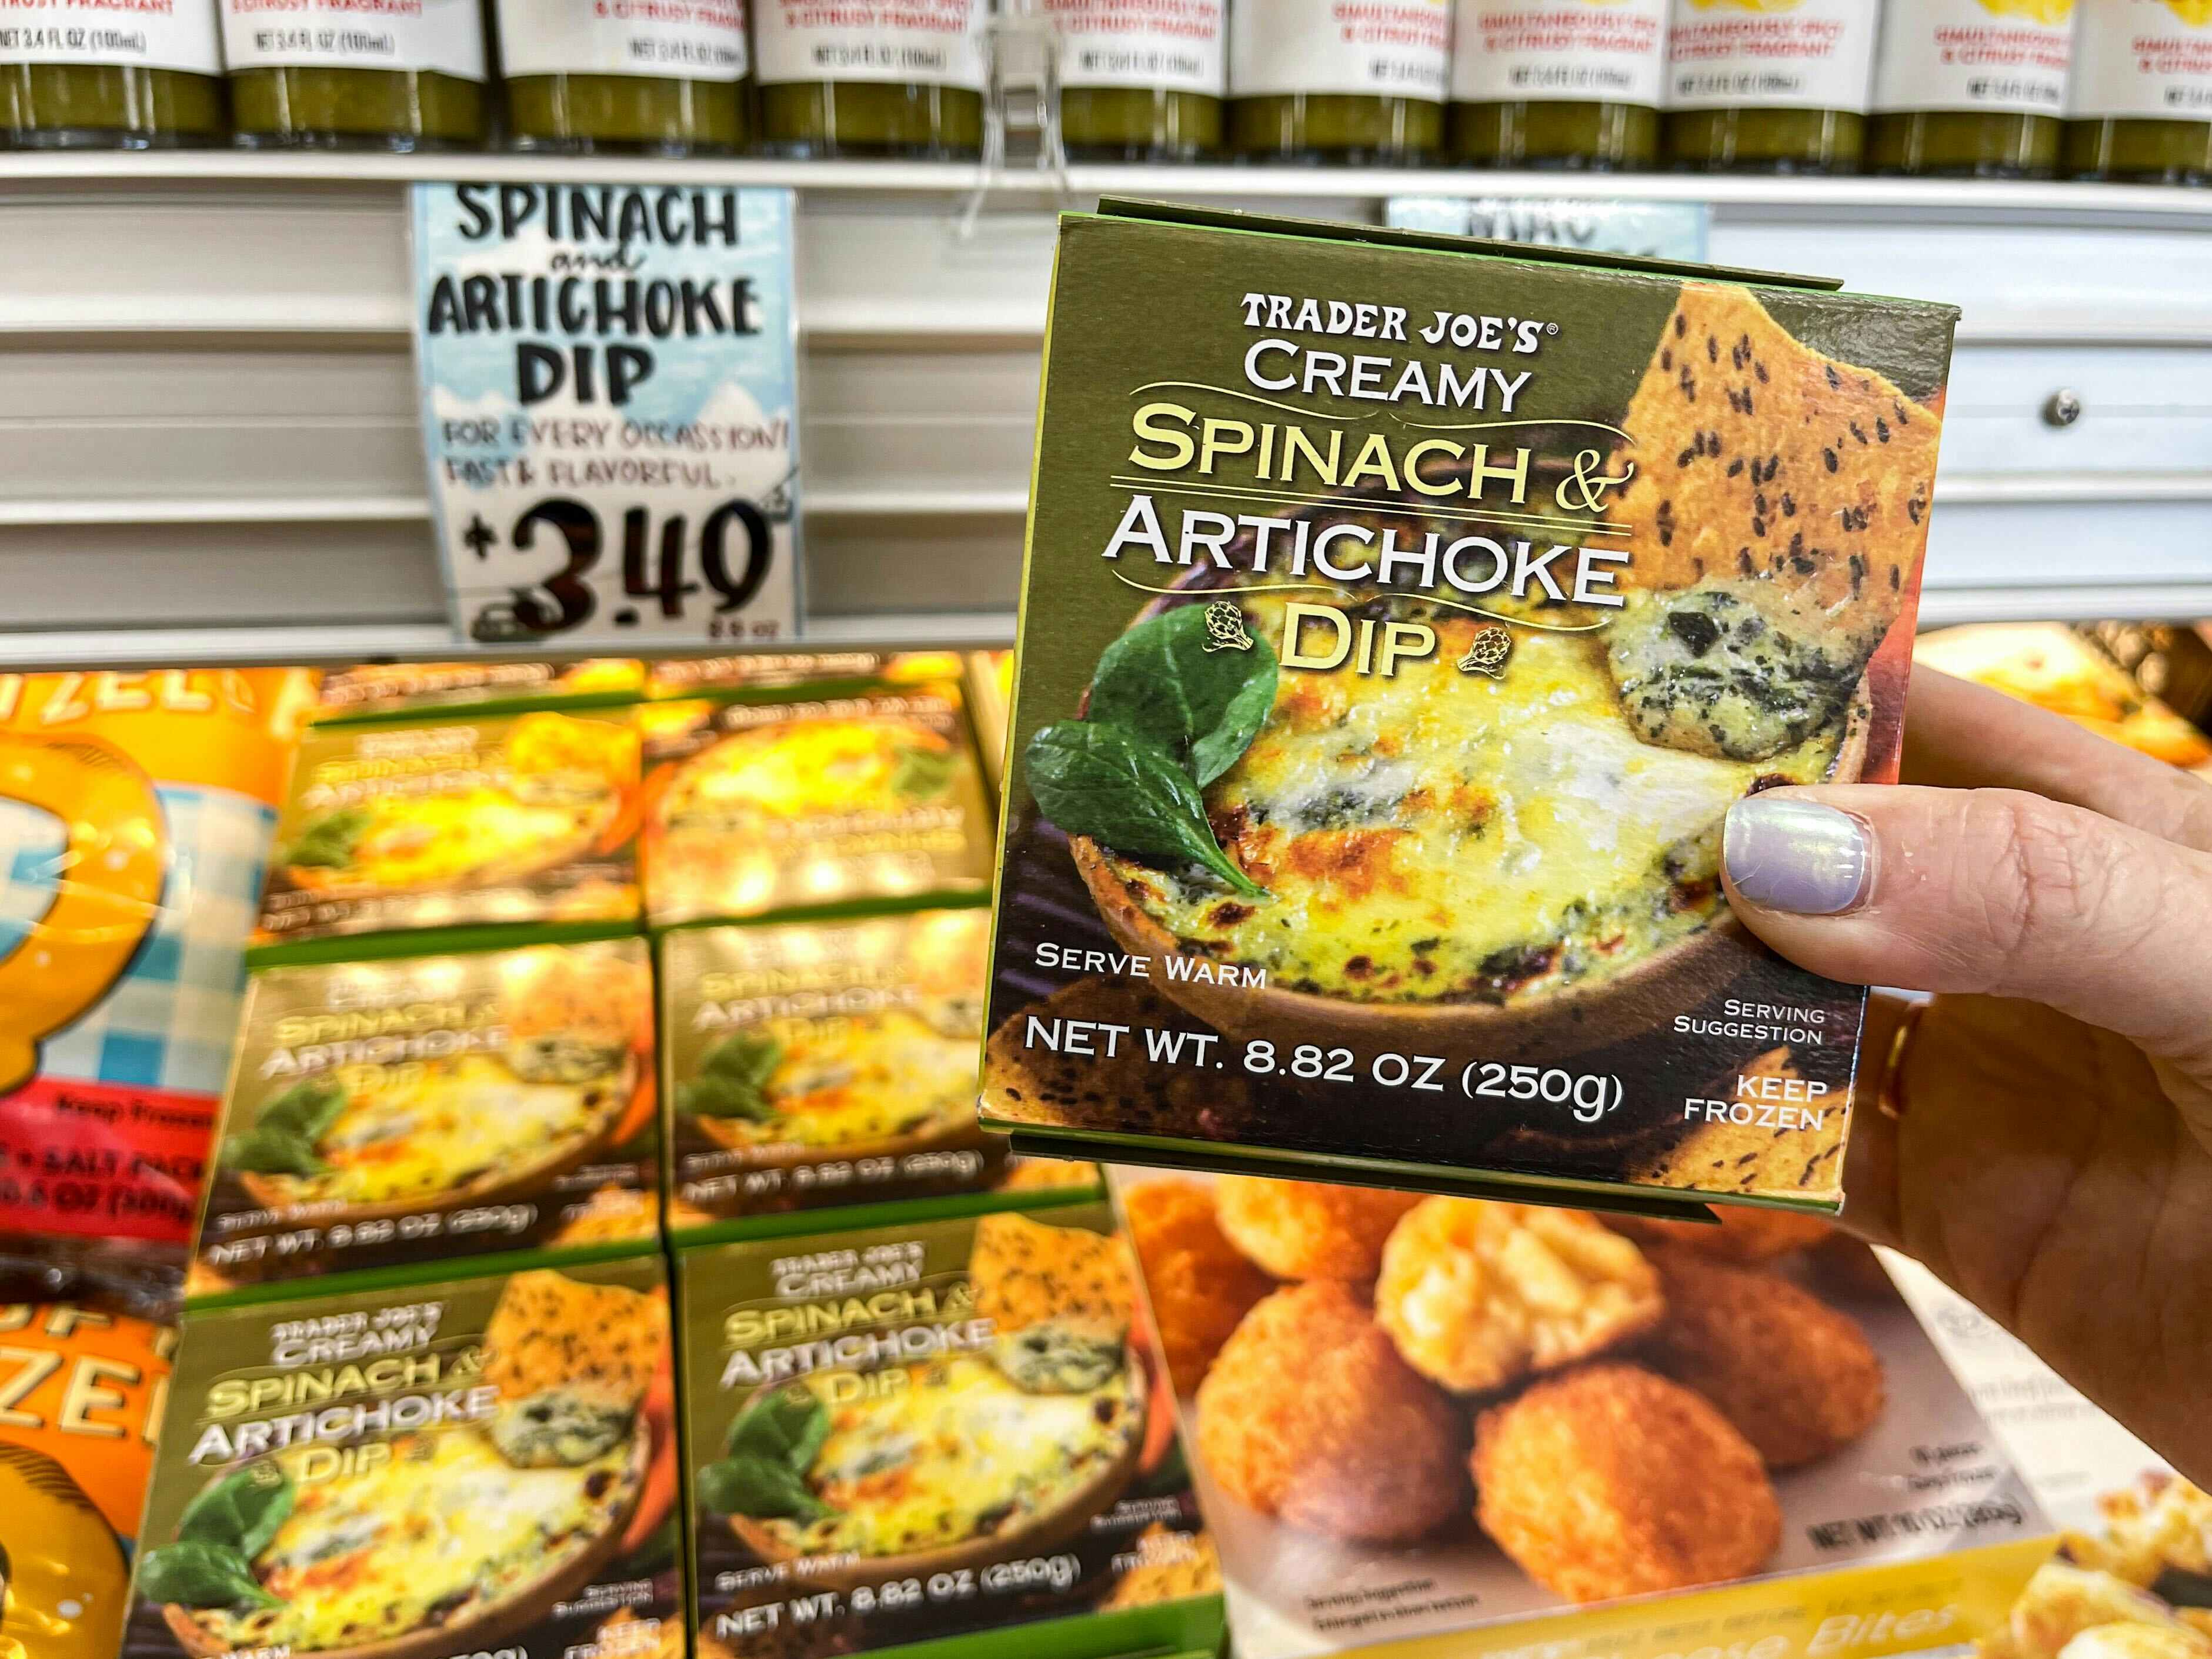 A person's hand holding a box of Trader Joe's Creamy Spinach & Artichoke Dip in front of the display and price sign at Trader Joe's.